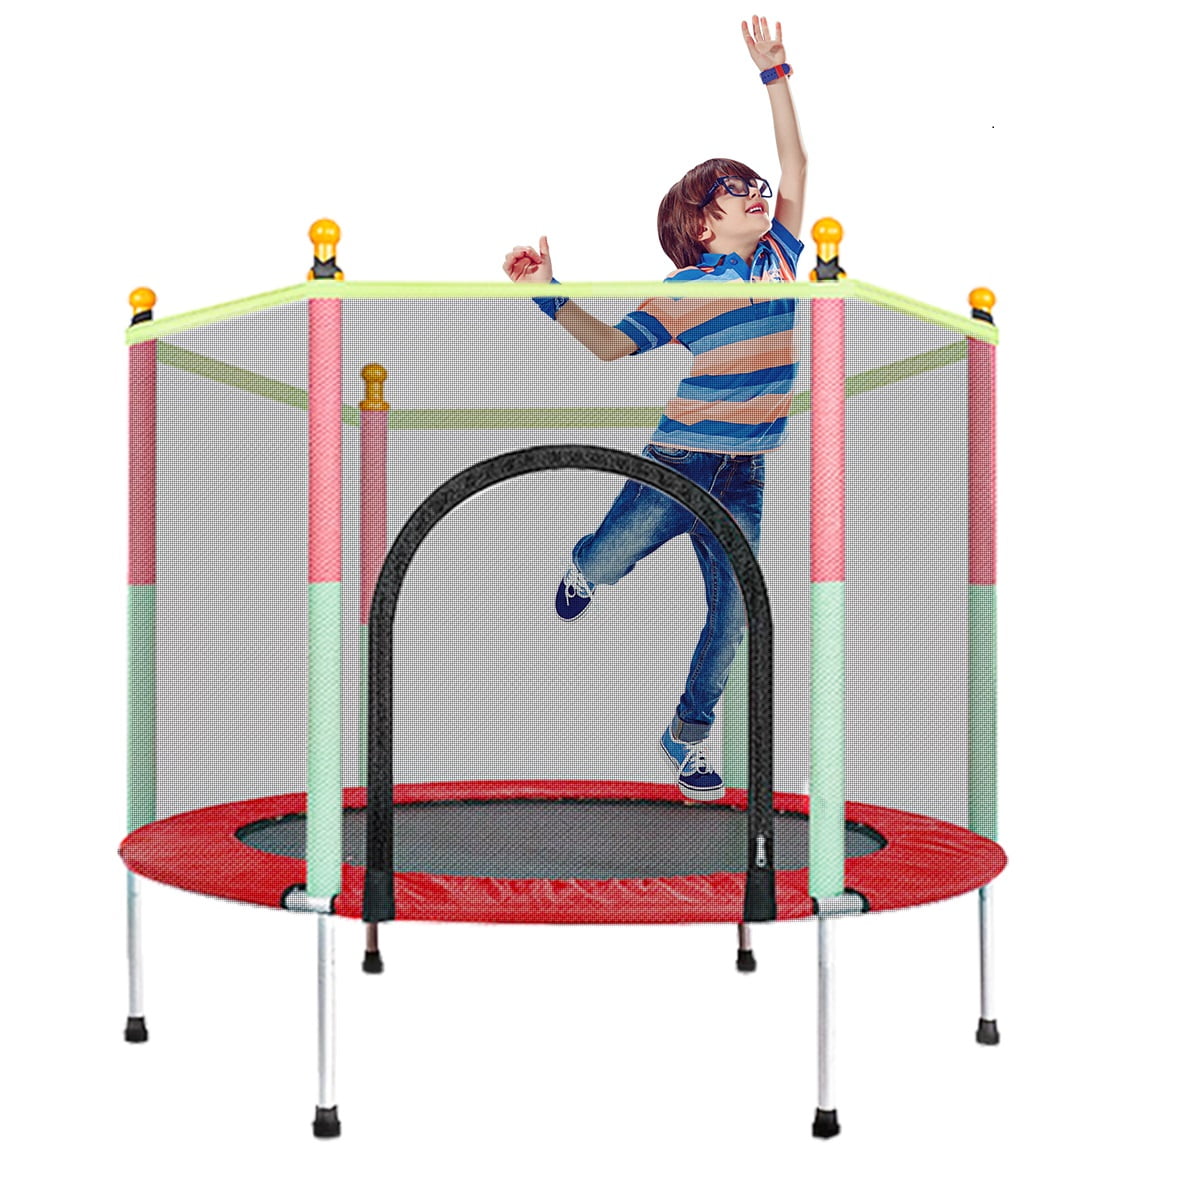 Mini Trampoline, 55" with Safety Net Enclosure Indoor Outdoor Children’s Activity Junior Trampoline, 440LB Capacity, for 2-6 Year old Kids